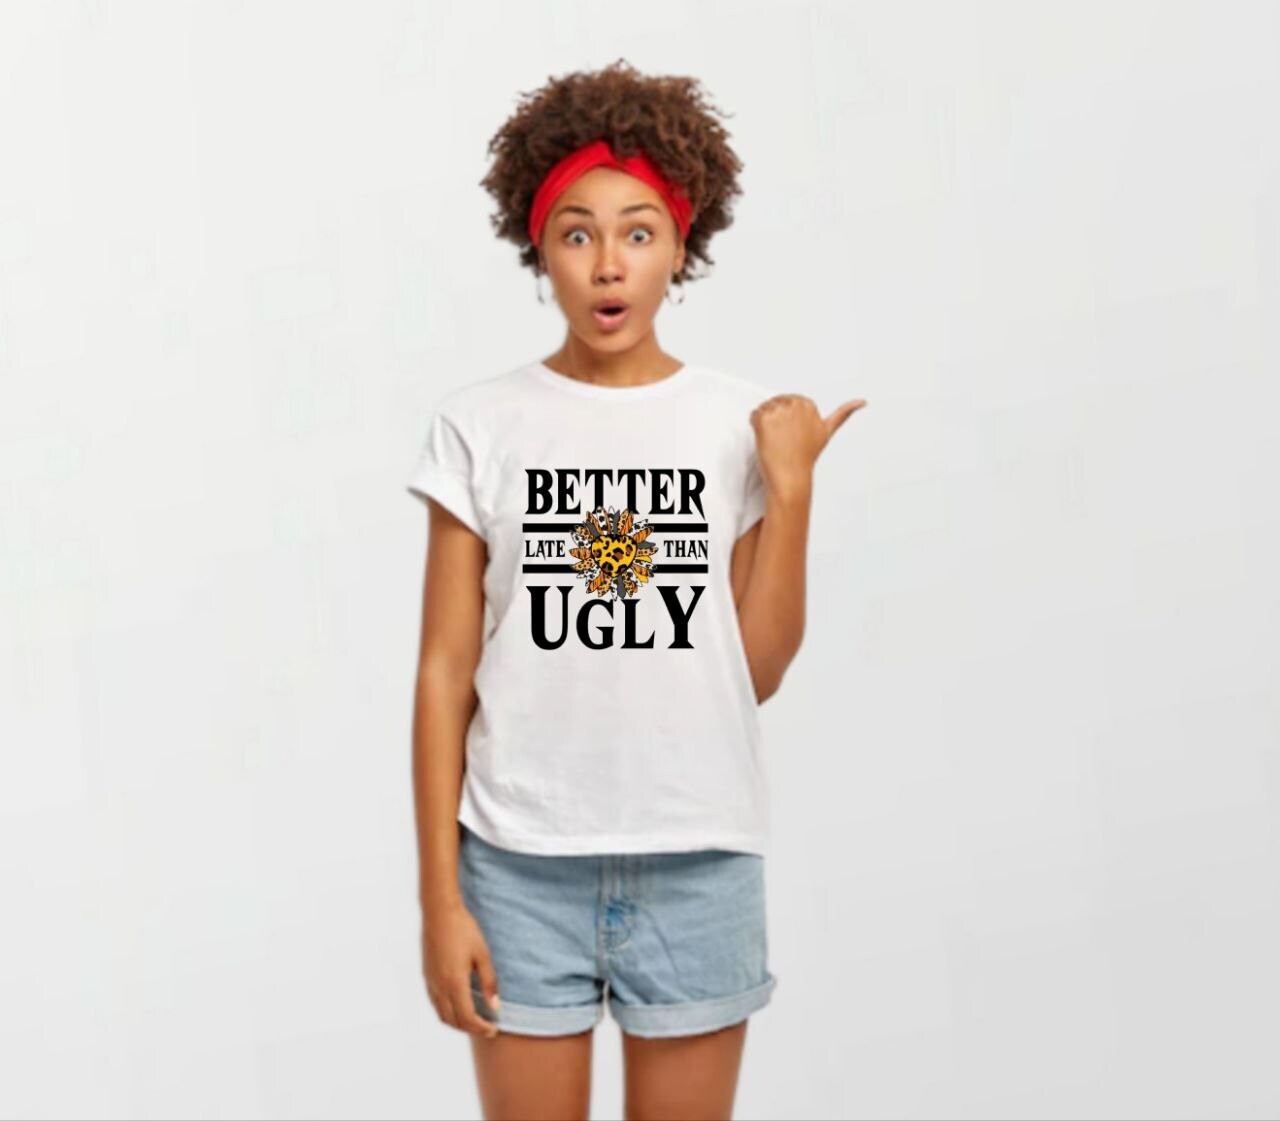 Better late than ugly_Women's Elite Tee white